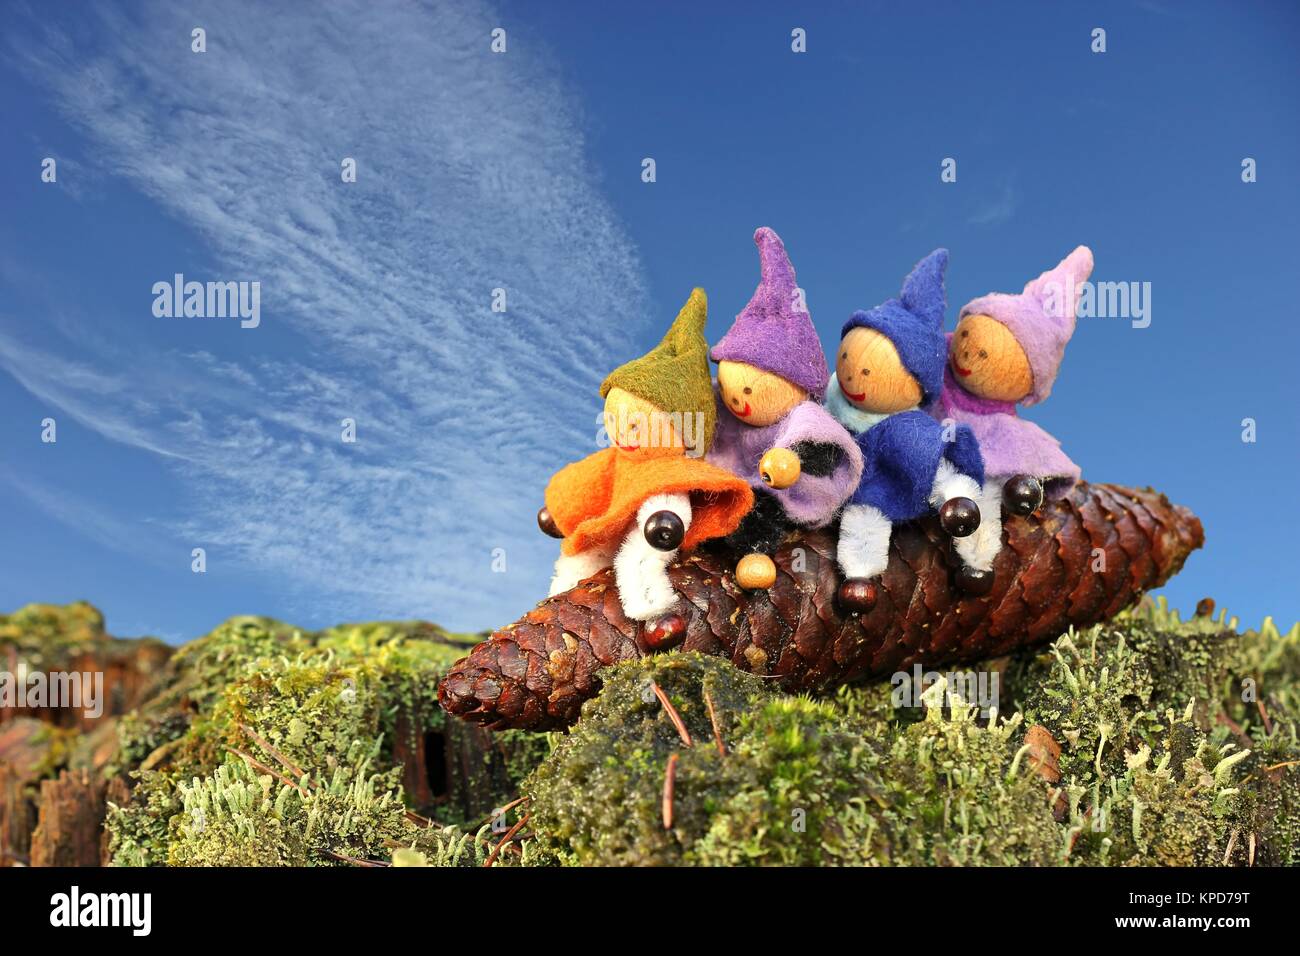 Four gnomes ride on a spruce cone Stock Photo